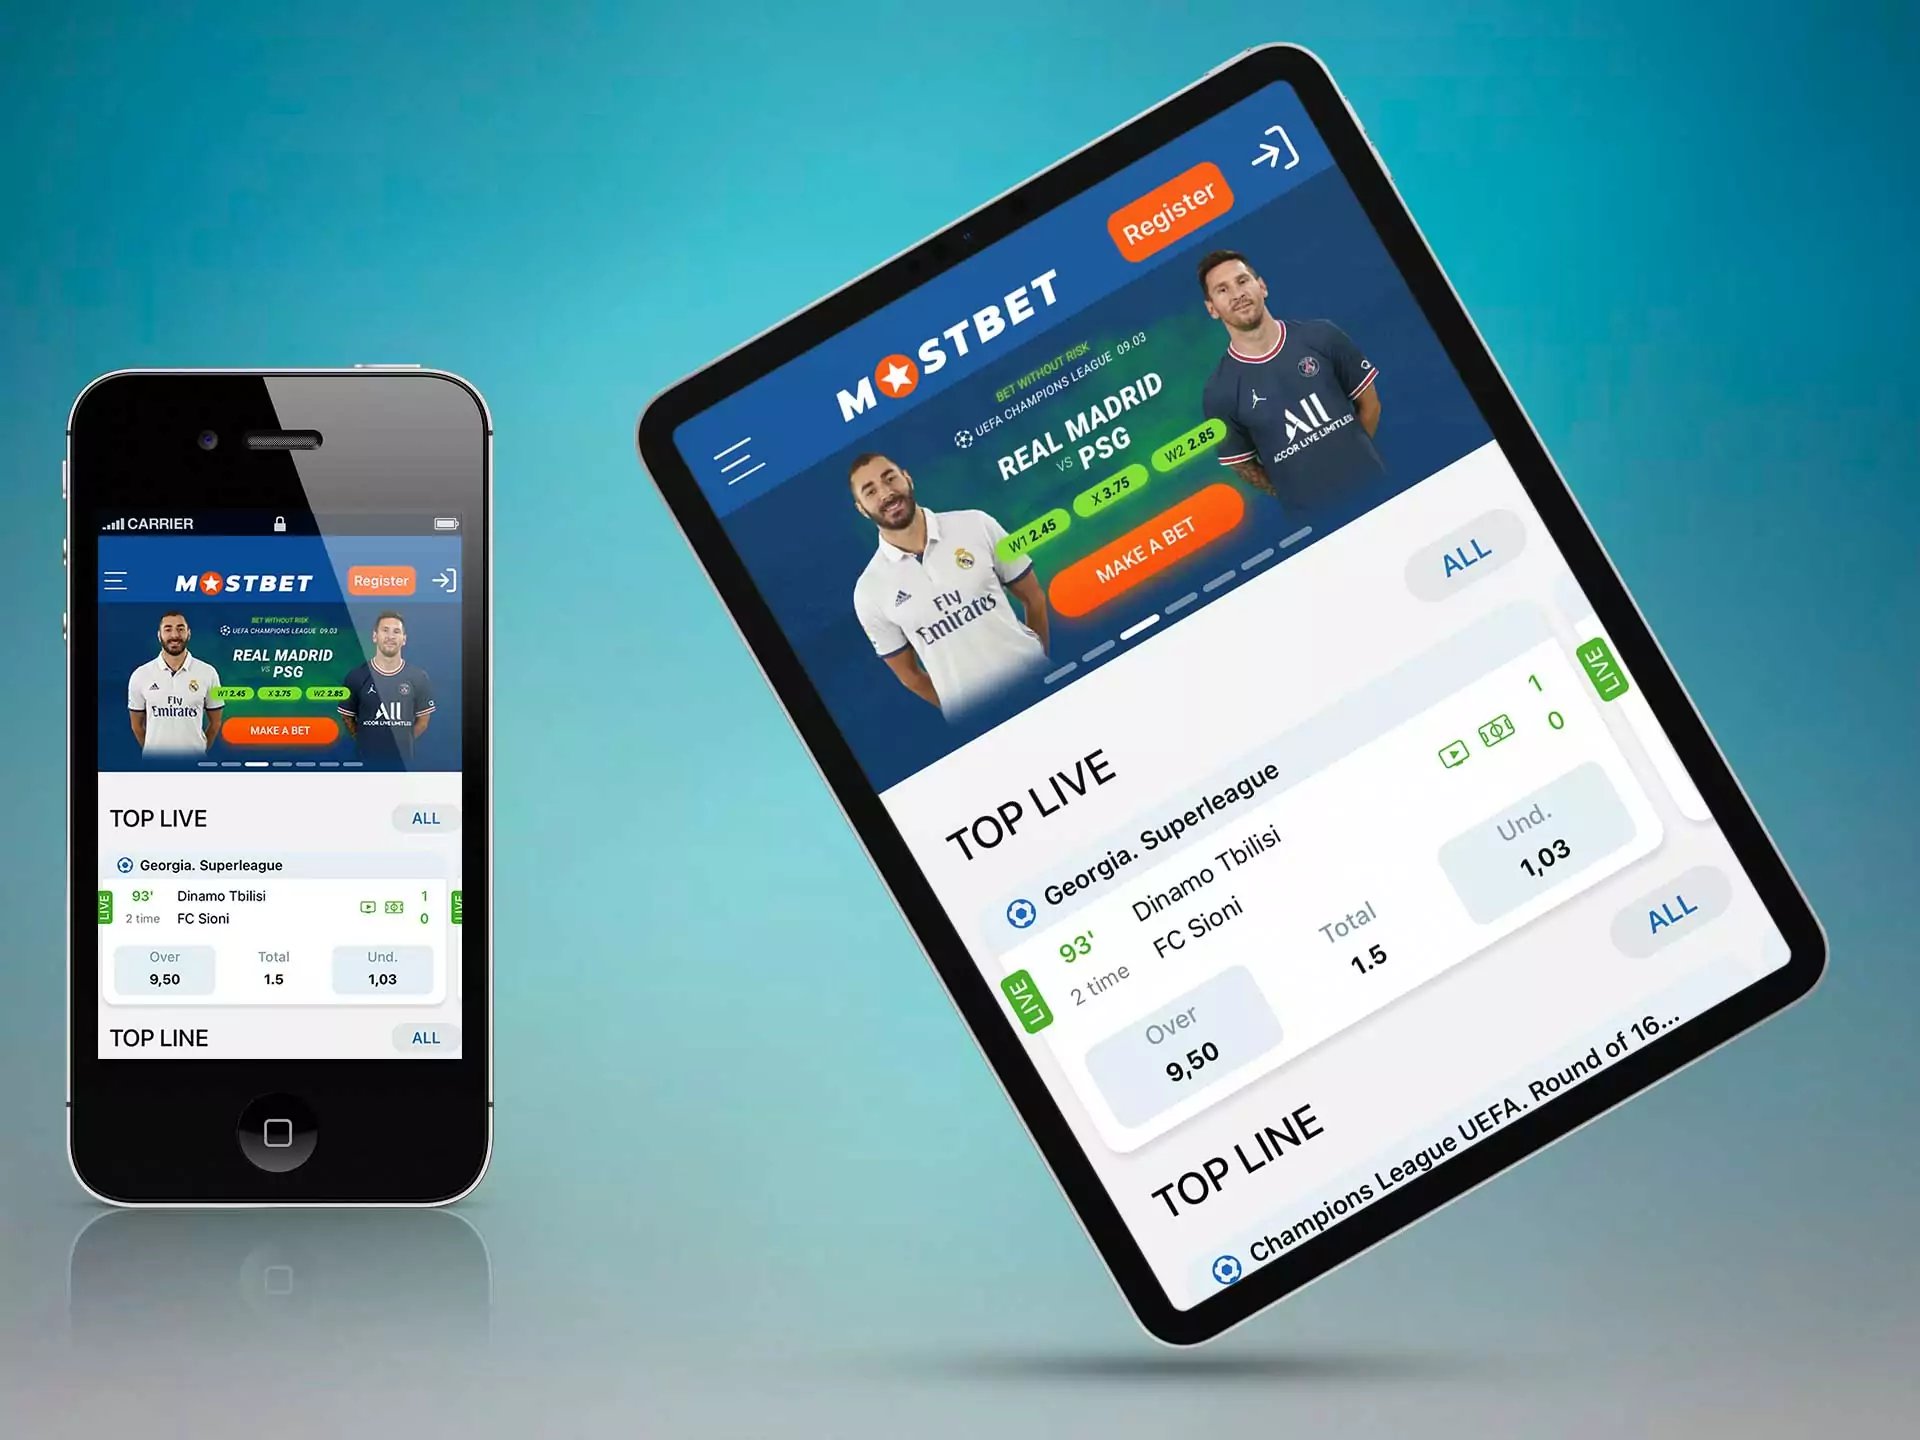 iphone 4 and above, all ipad versions support the Mostbet app.